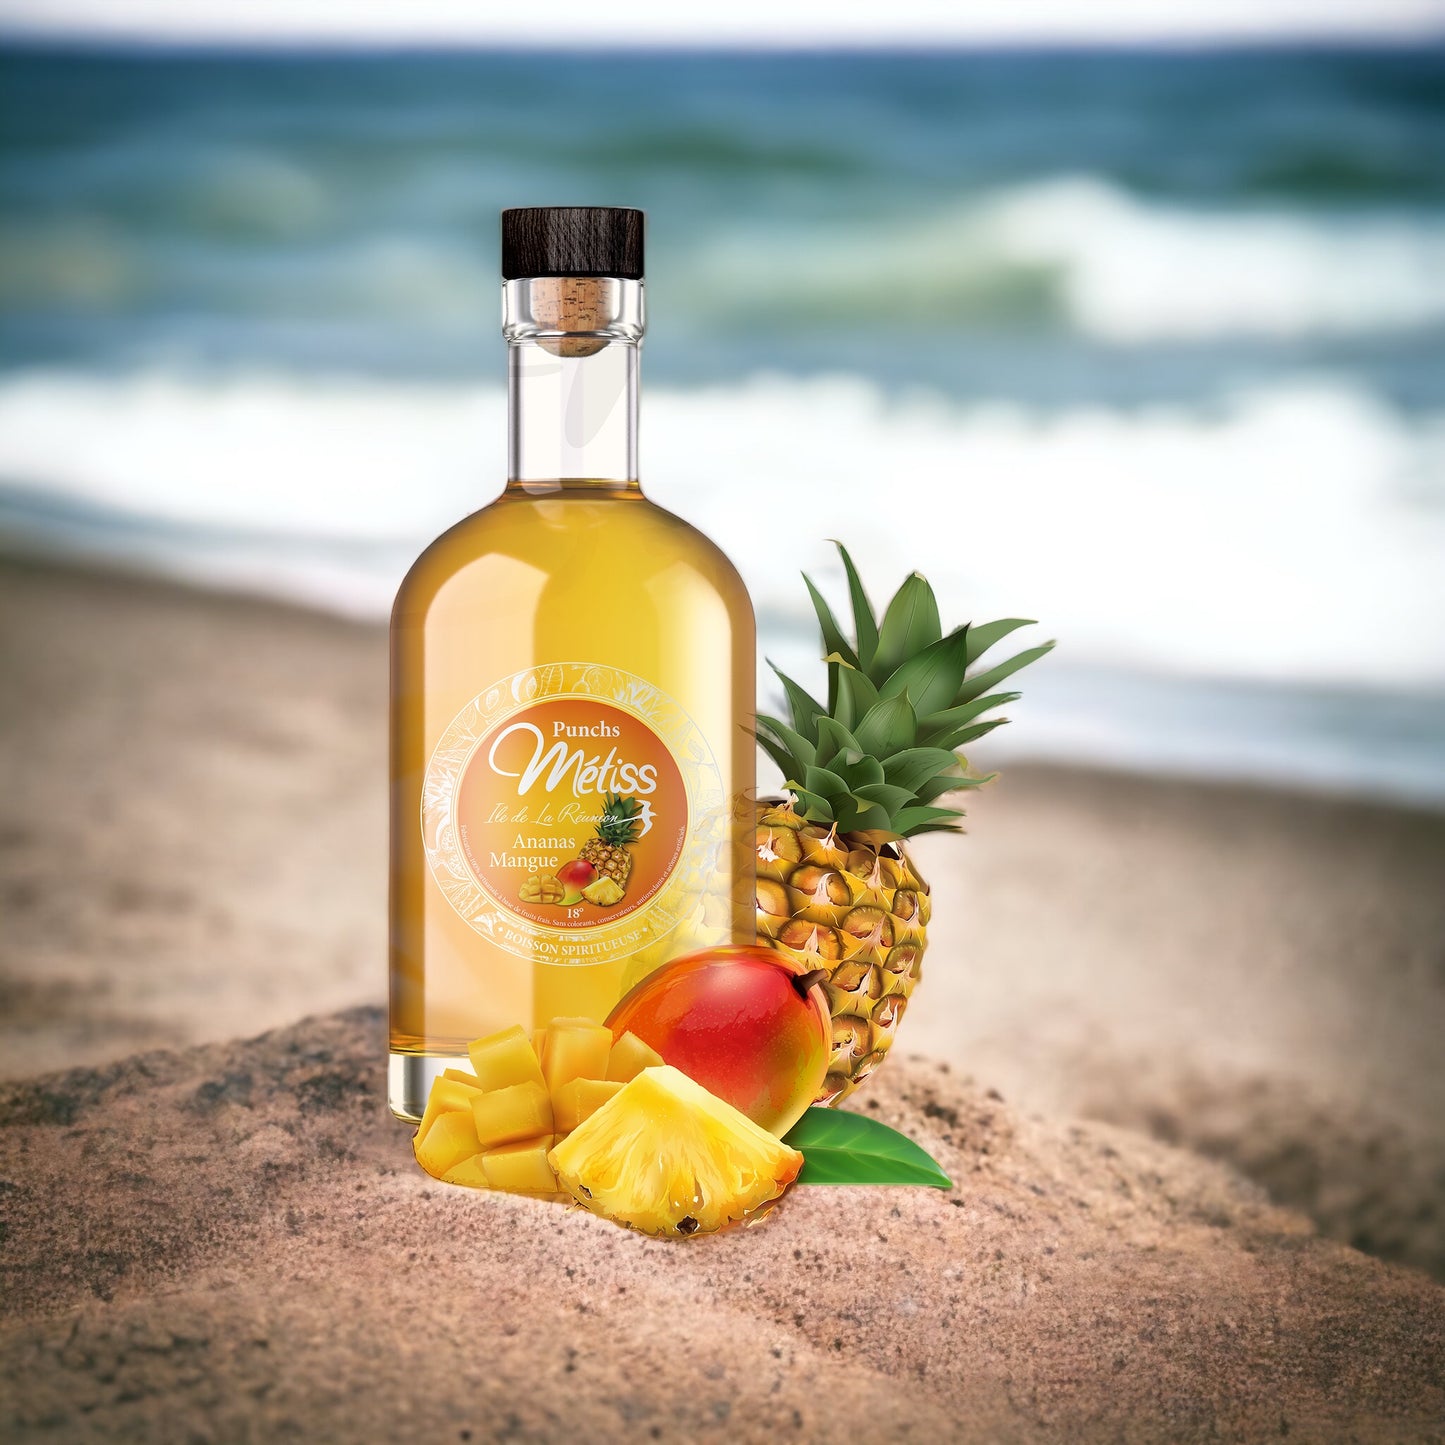 Punch Pineapple Victoria Mango, 35 cl